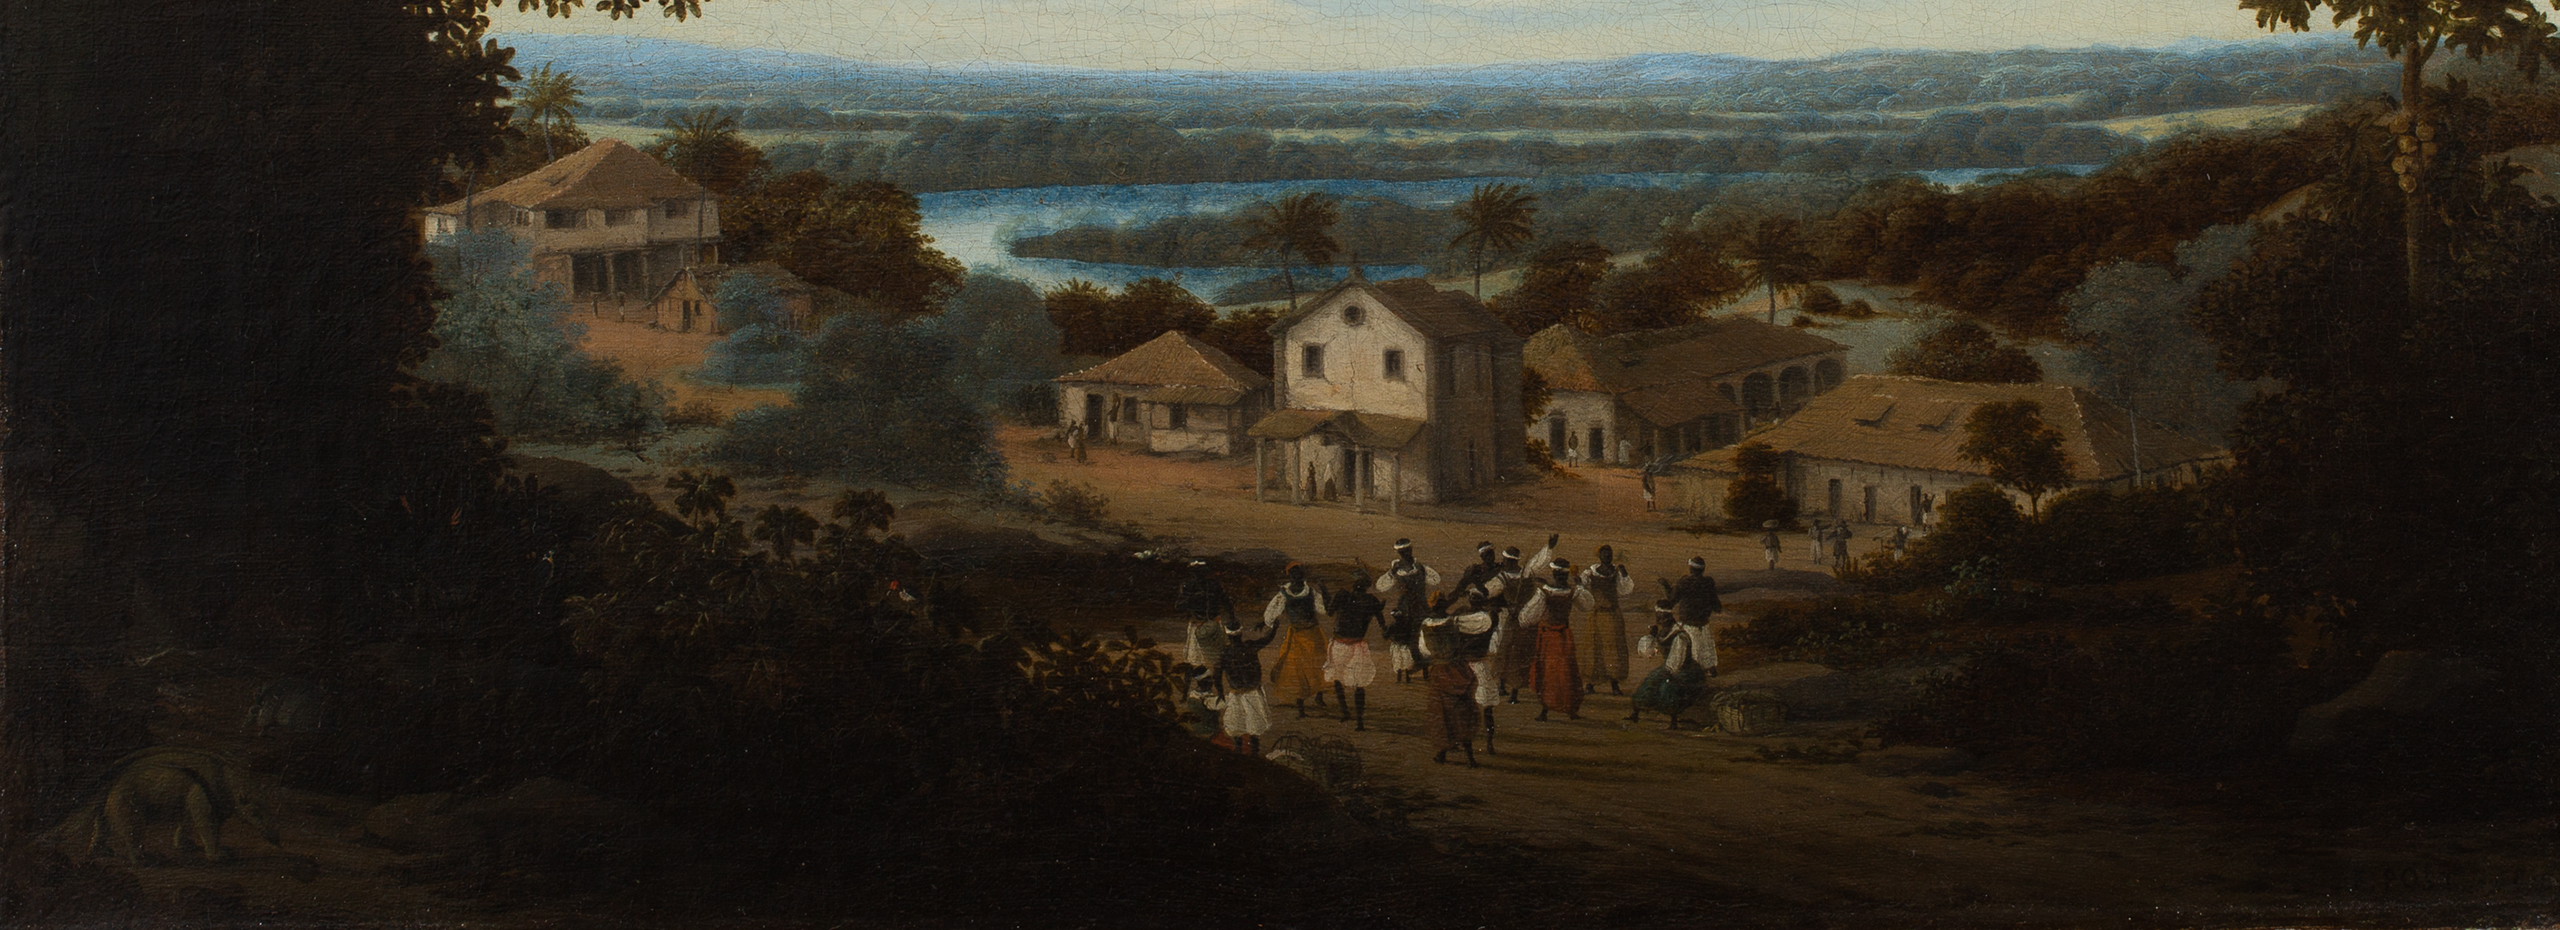 Part of an oil painting of a Brazilian landscape includes a group of Black people in 17th century dress and small light colored houses